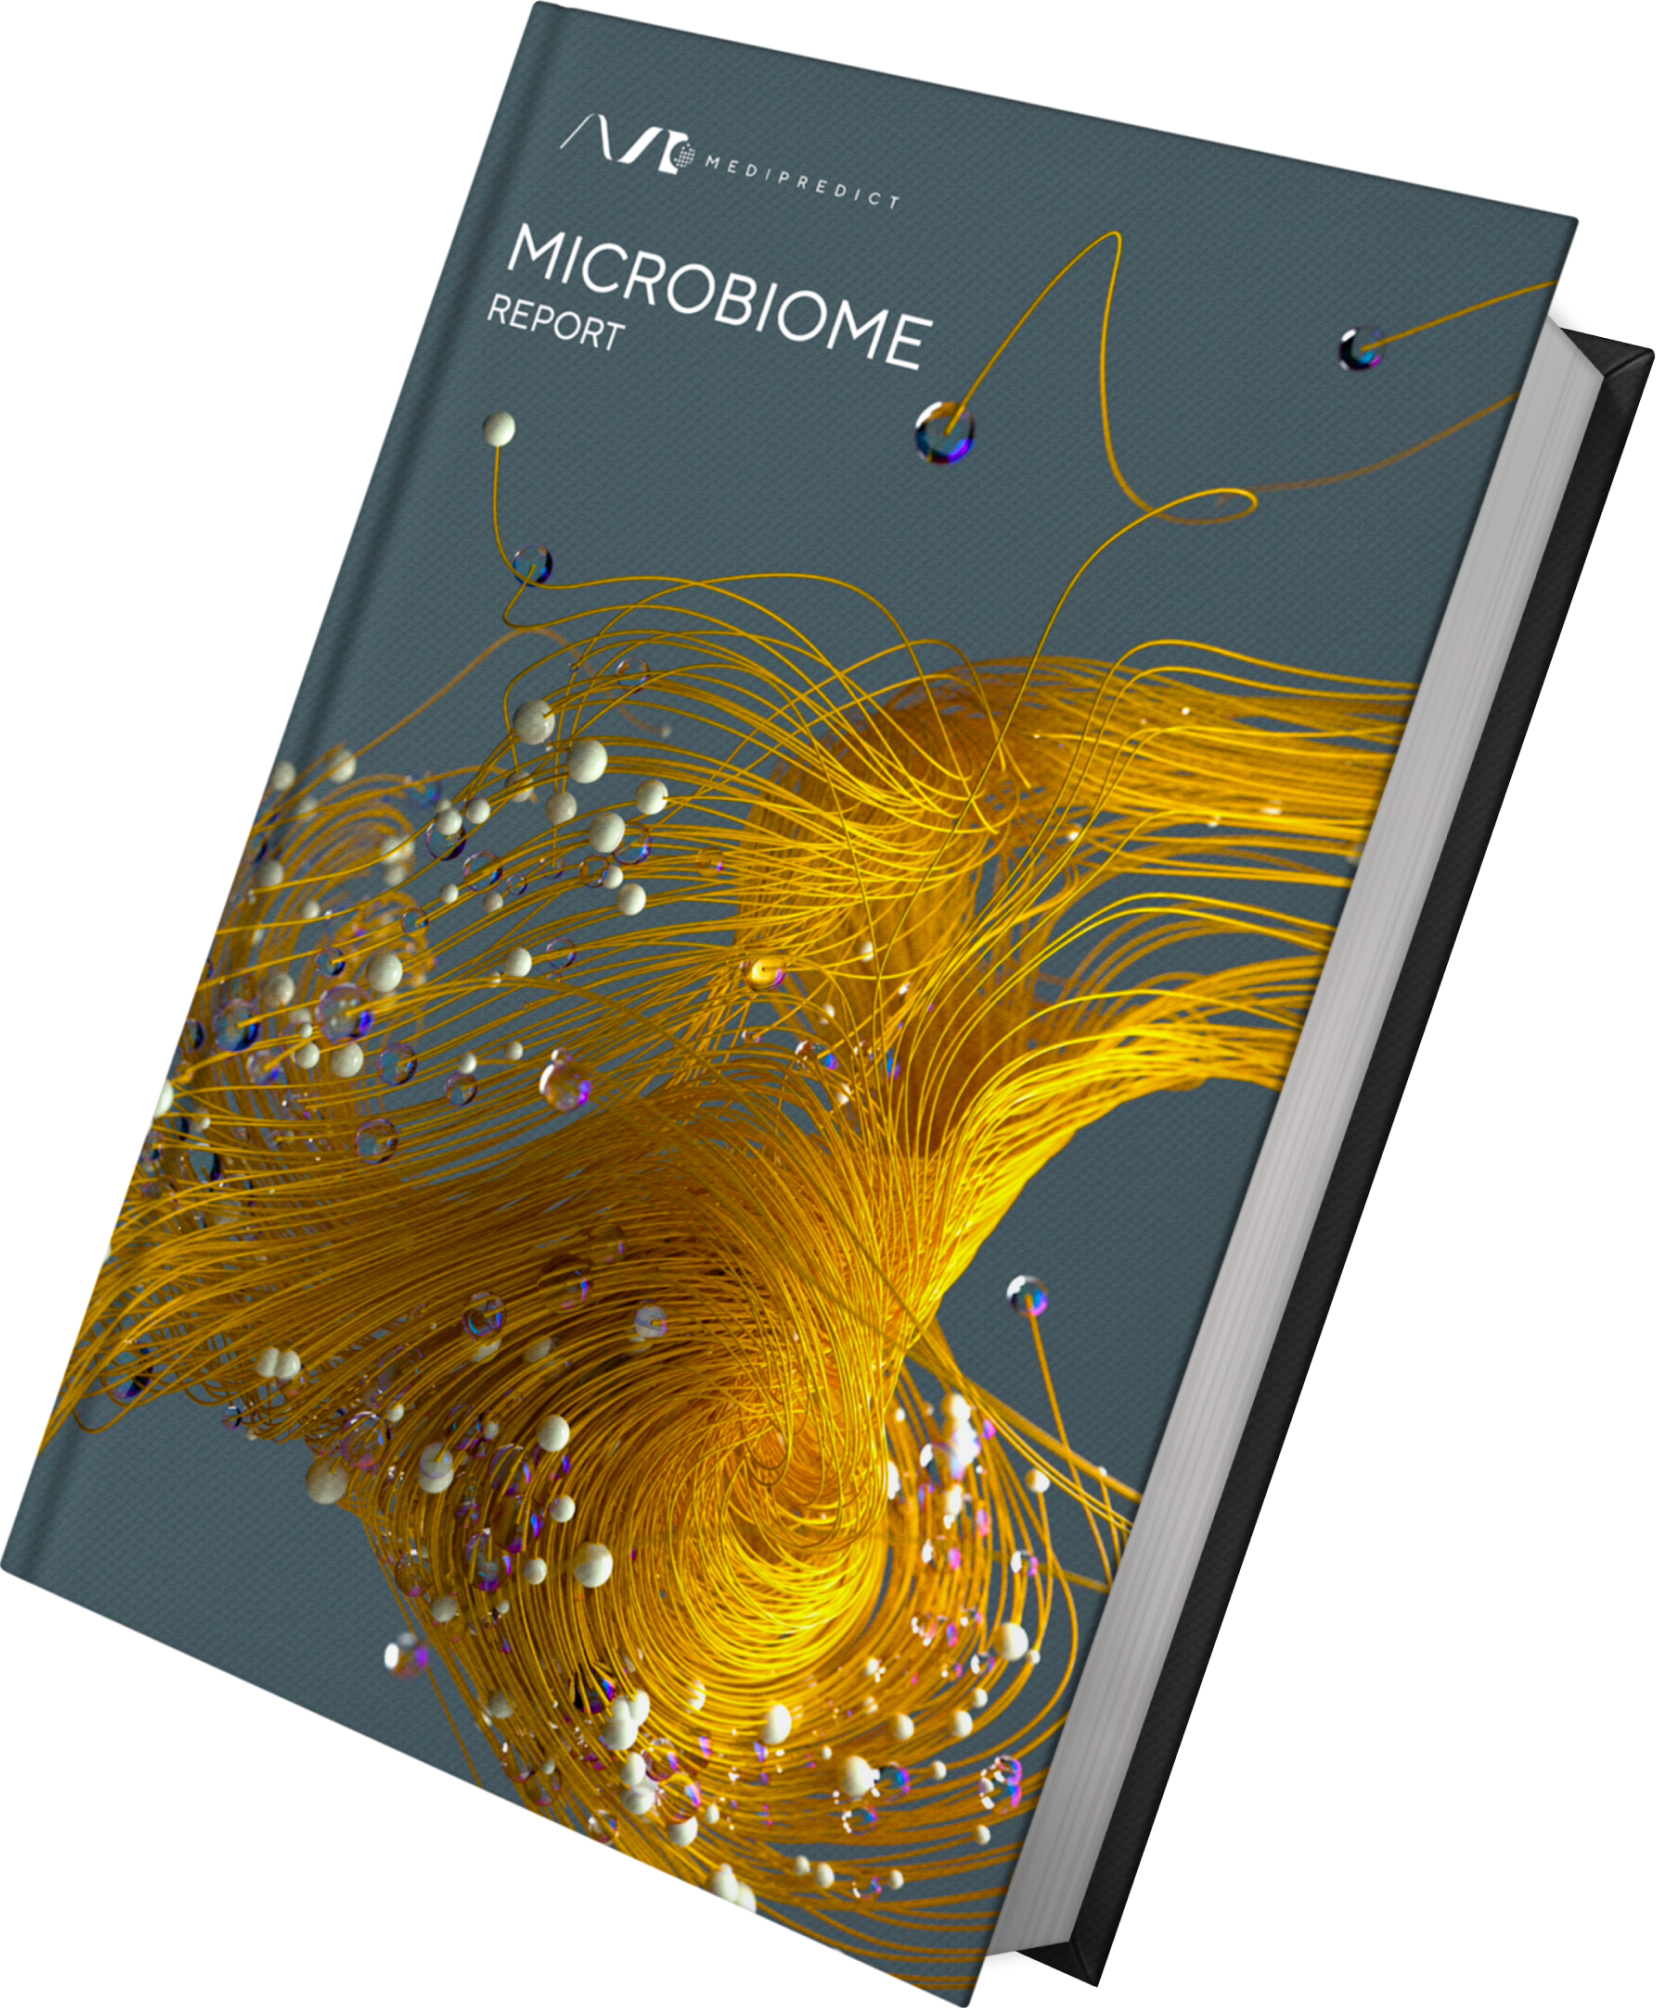 Microbiome report